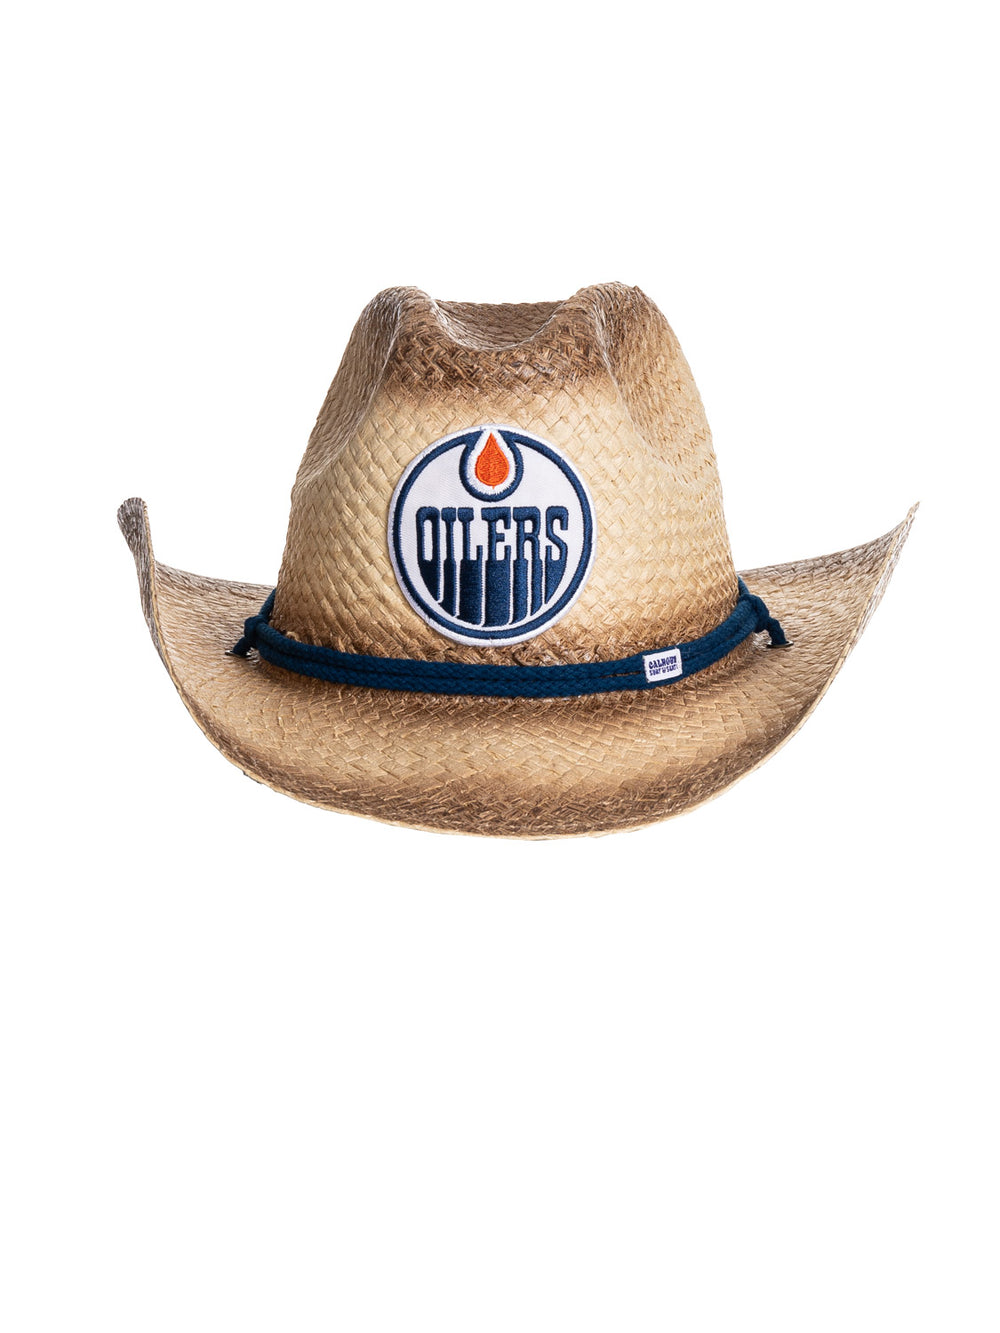 The front of the Edmonton Oilers straw cowboy hat. It is a tan straw hat with the Oilers logo in the centre of it, with a navy blue rope running along the crown of the hat.